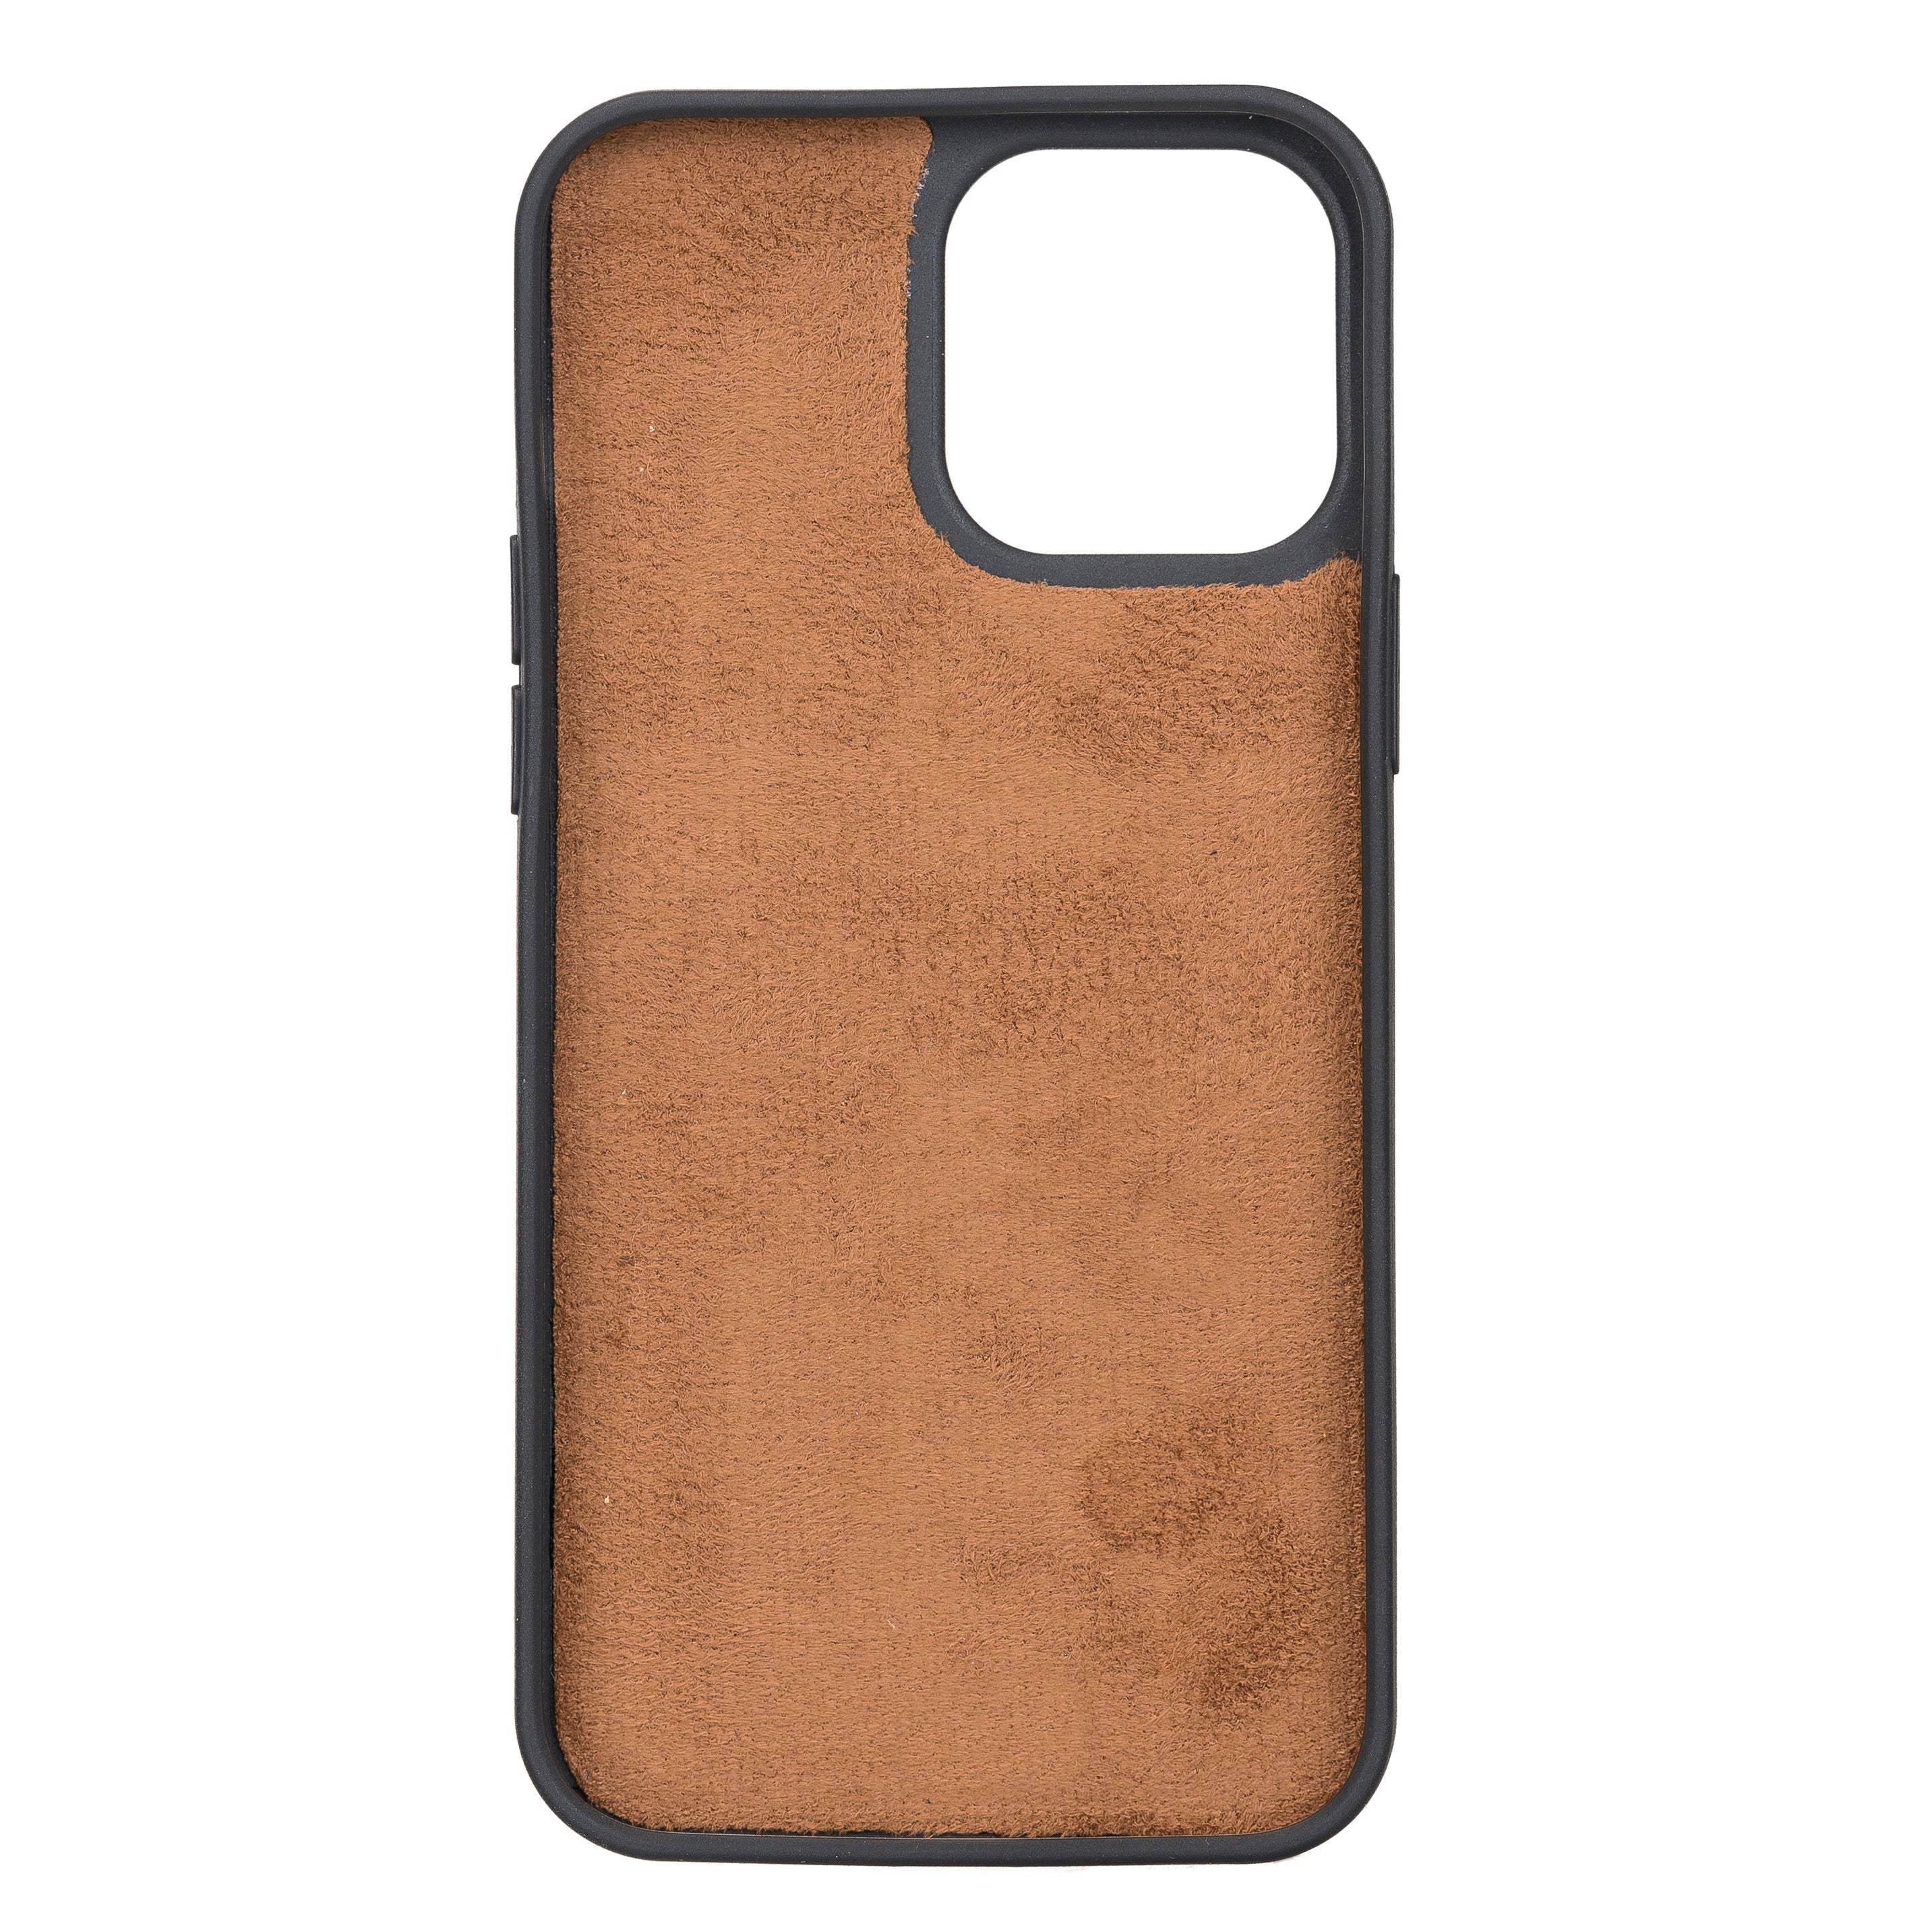 Camel Brown Leather Snap On Cover Case for iPhone 13 Mini (5.4")